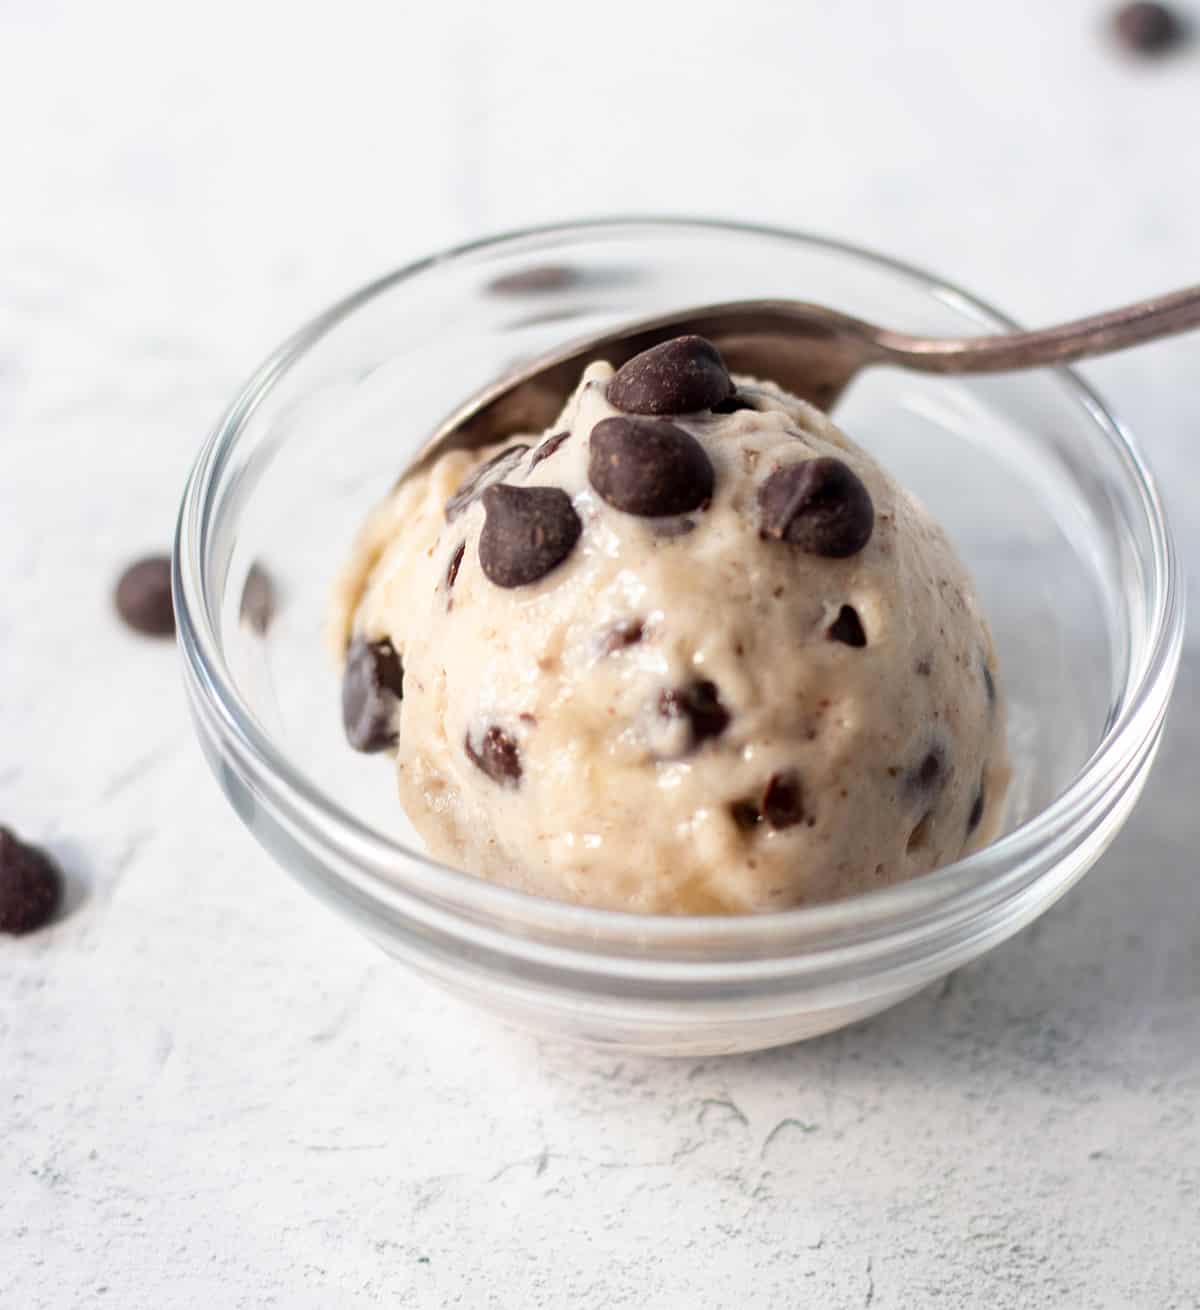 mint chocolate chip nice cream in a clear glass bowl topped with extra chocolate chips and a silver spoon in the bowl.